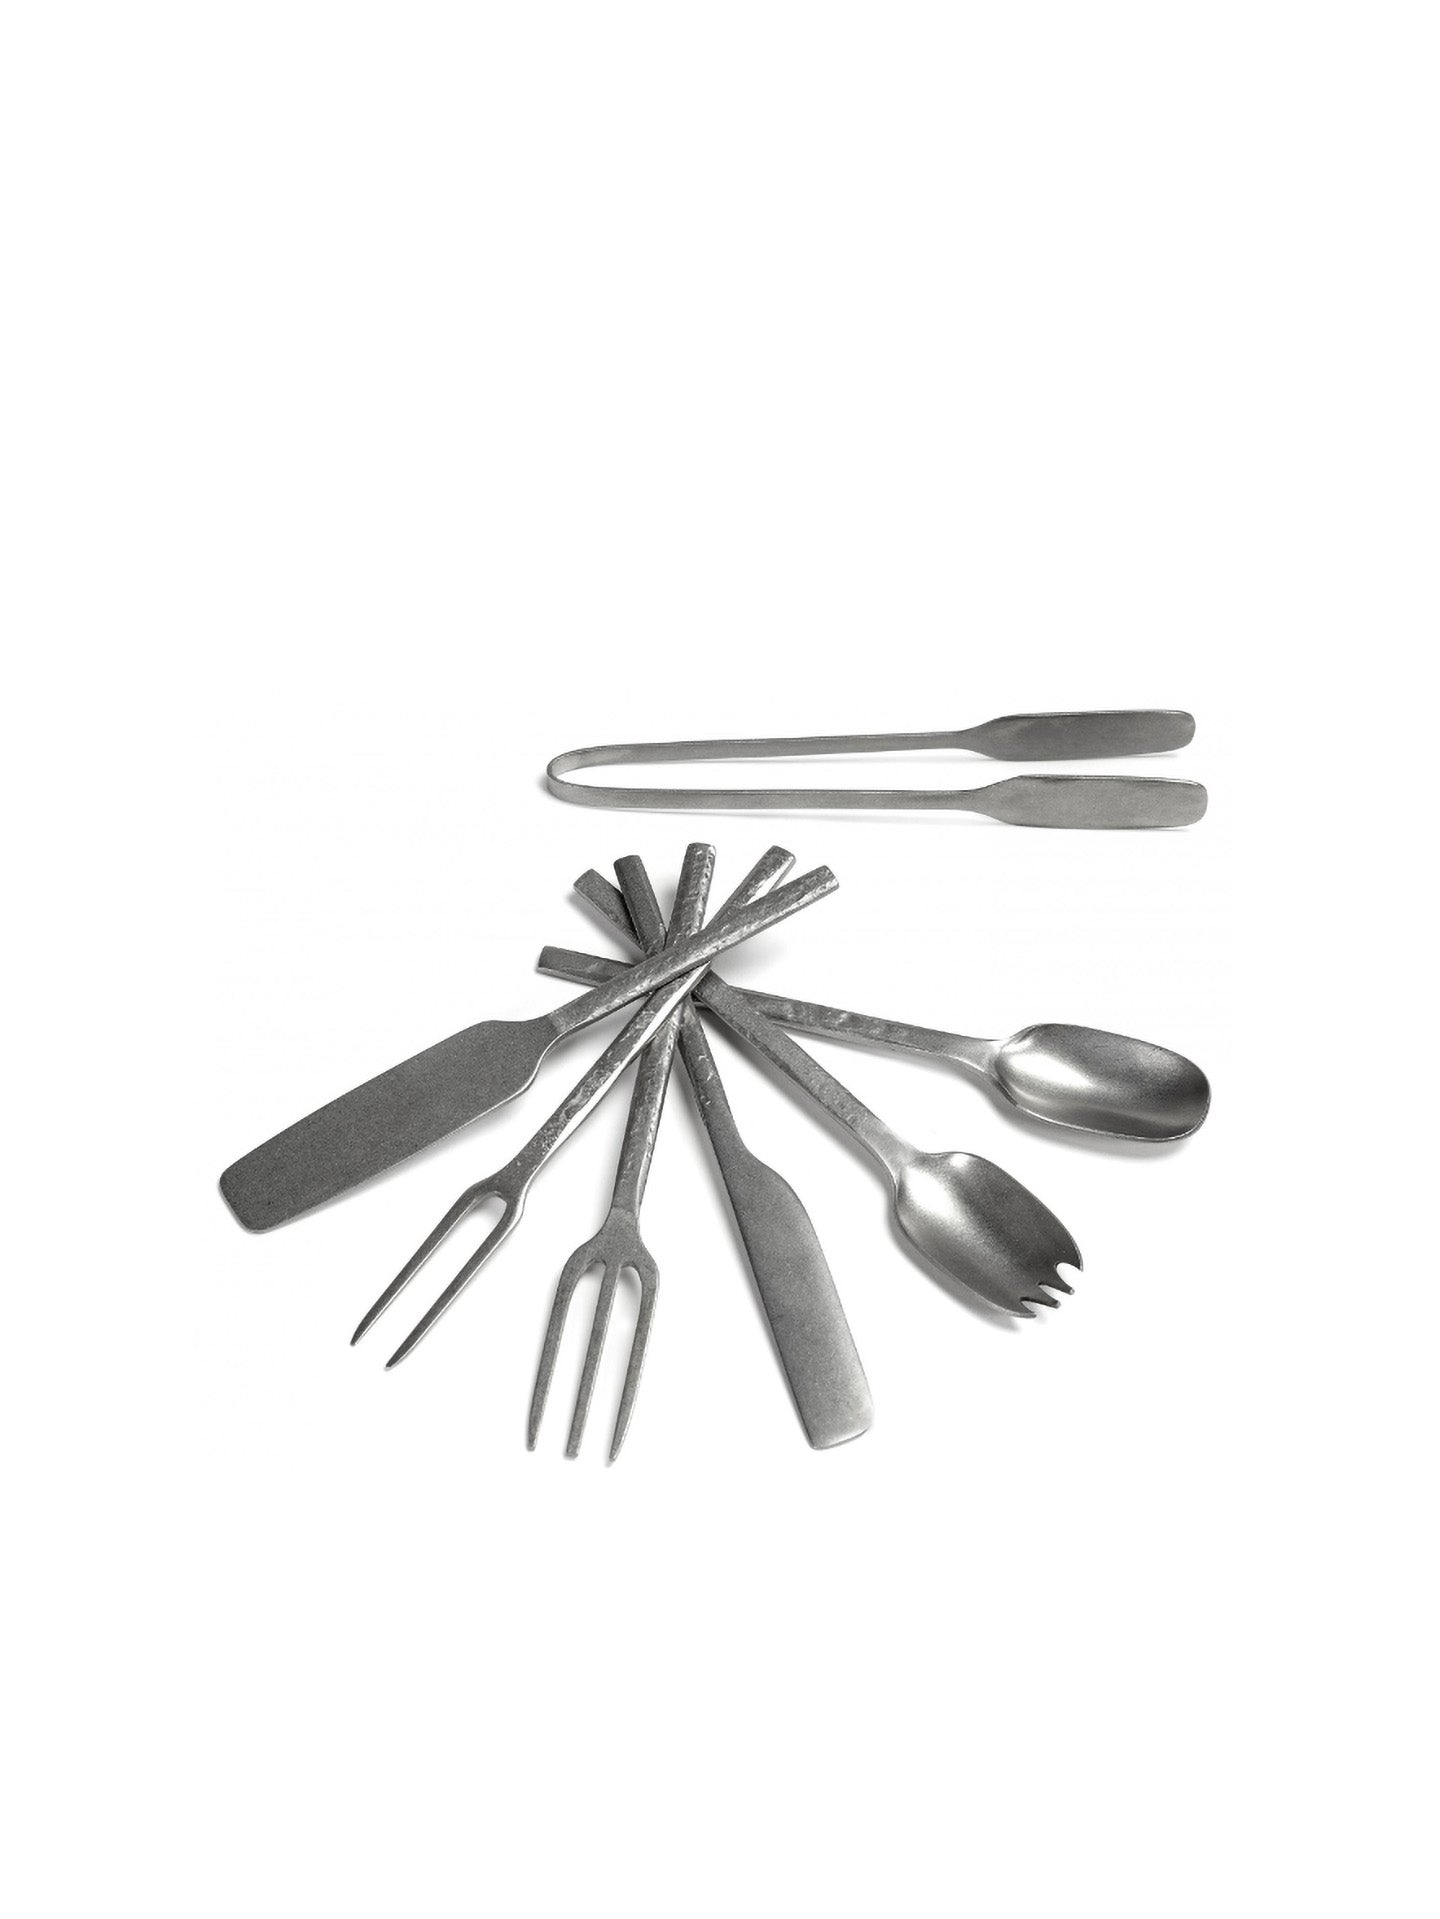 Cutleries from Serax are dishwasher safe and feel great to hold in hand.